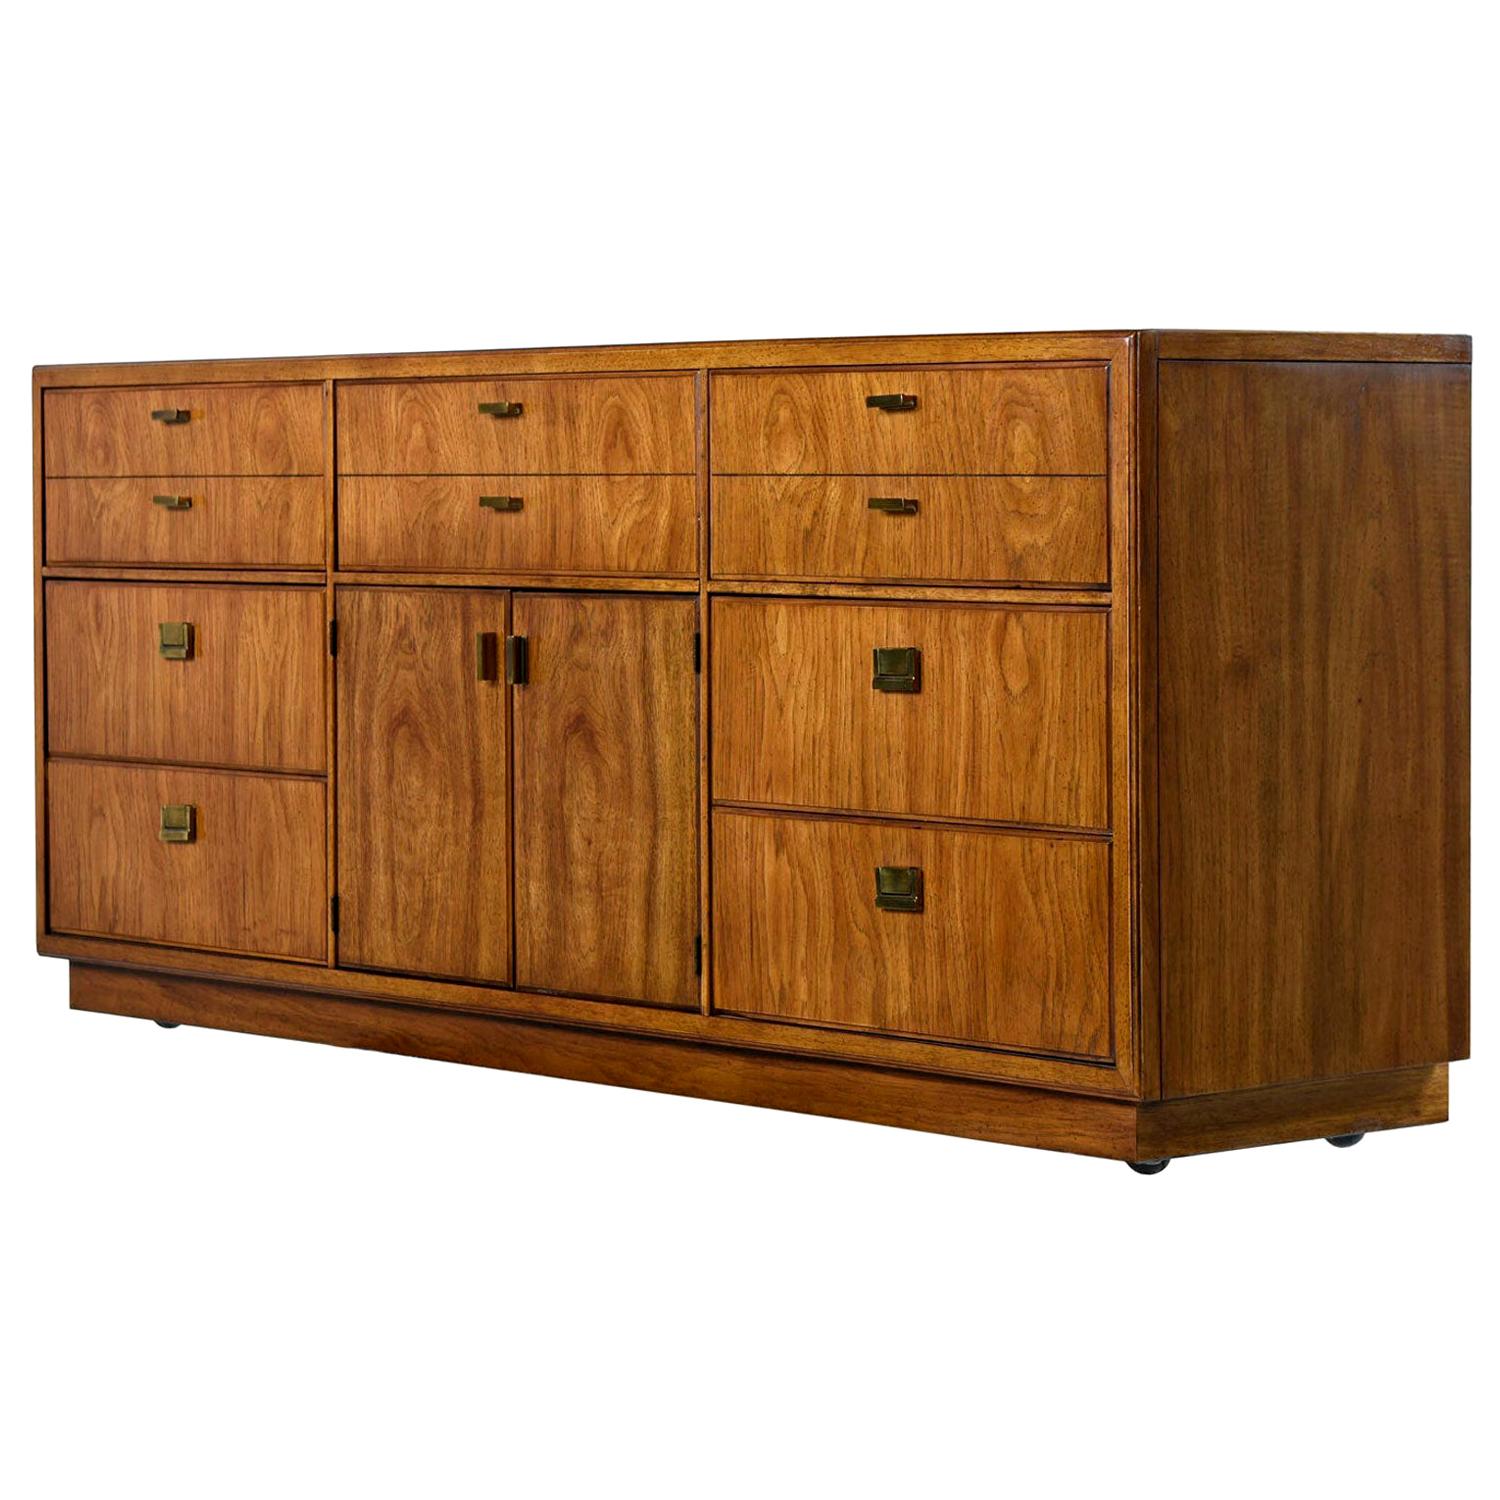 Dorothy Draper style campaign dresser made by esteemed US furniture maker Drexel Heritage, circa 1970s. Old growth flaxen flared grain pecan top to bottom. Brass pull hardware ties together British traditional and Eastern design. This dresser